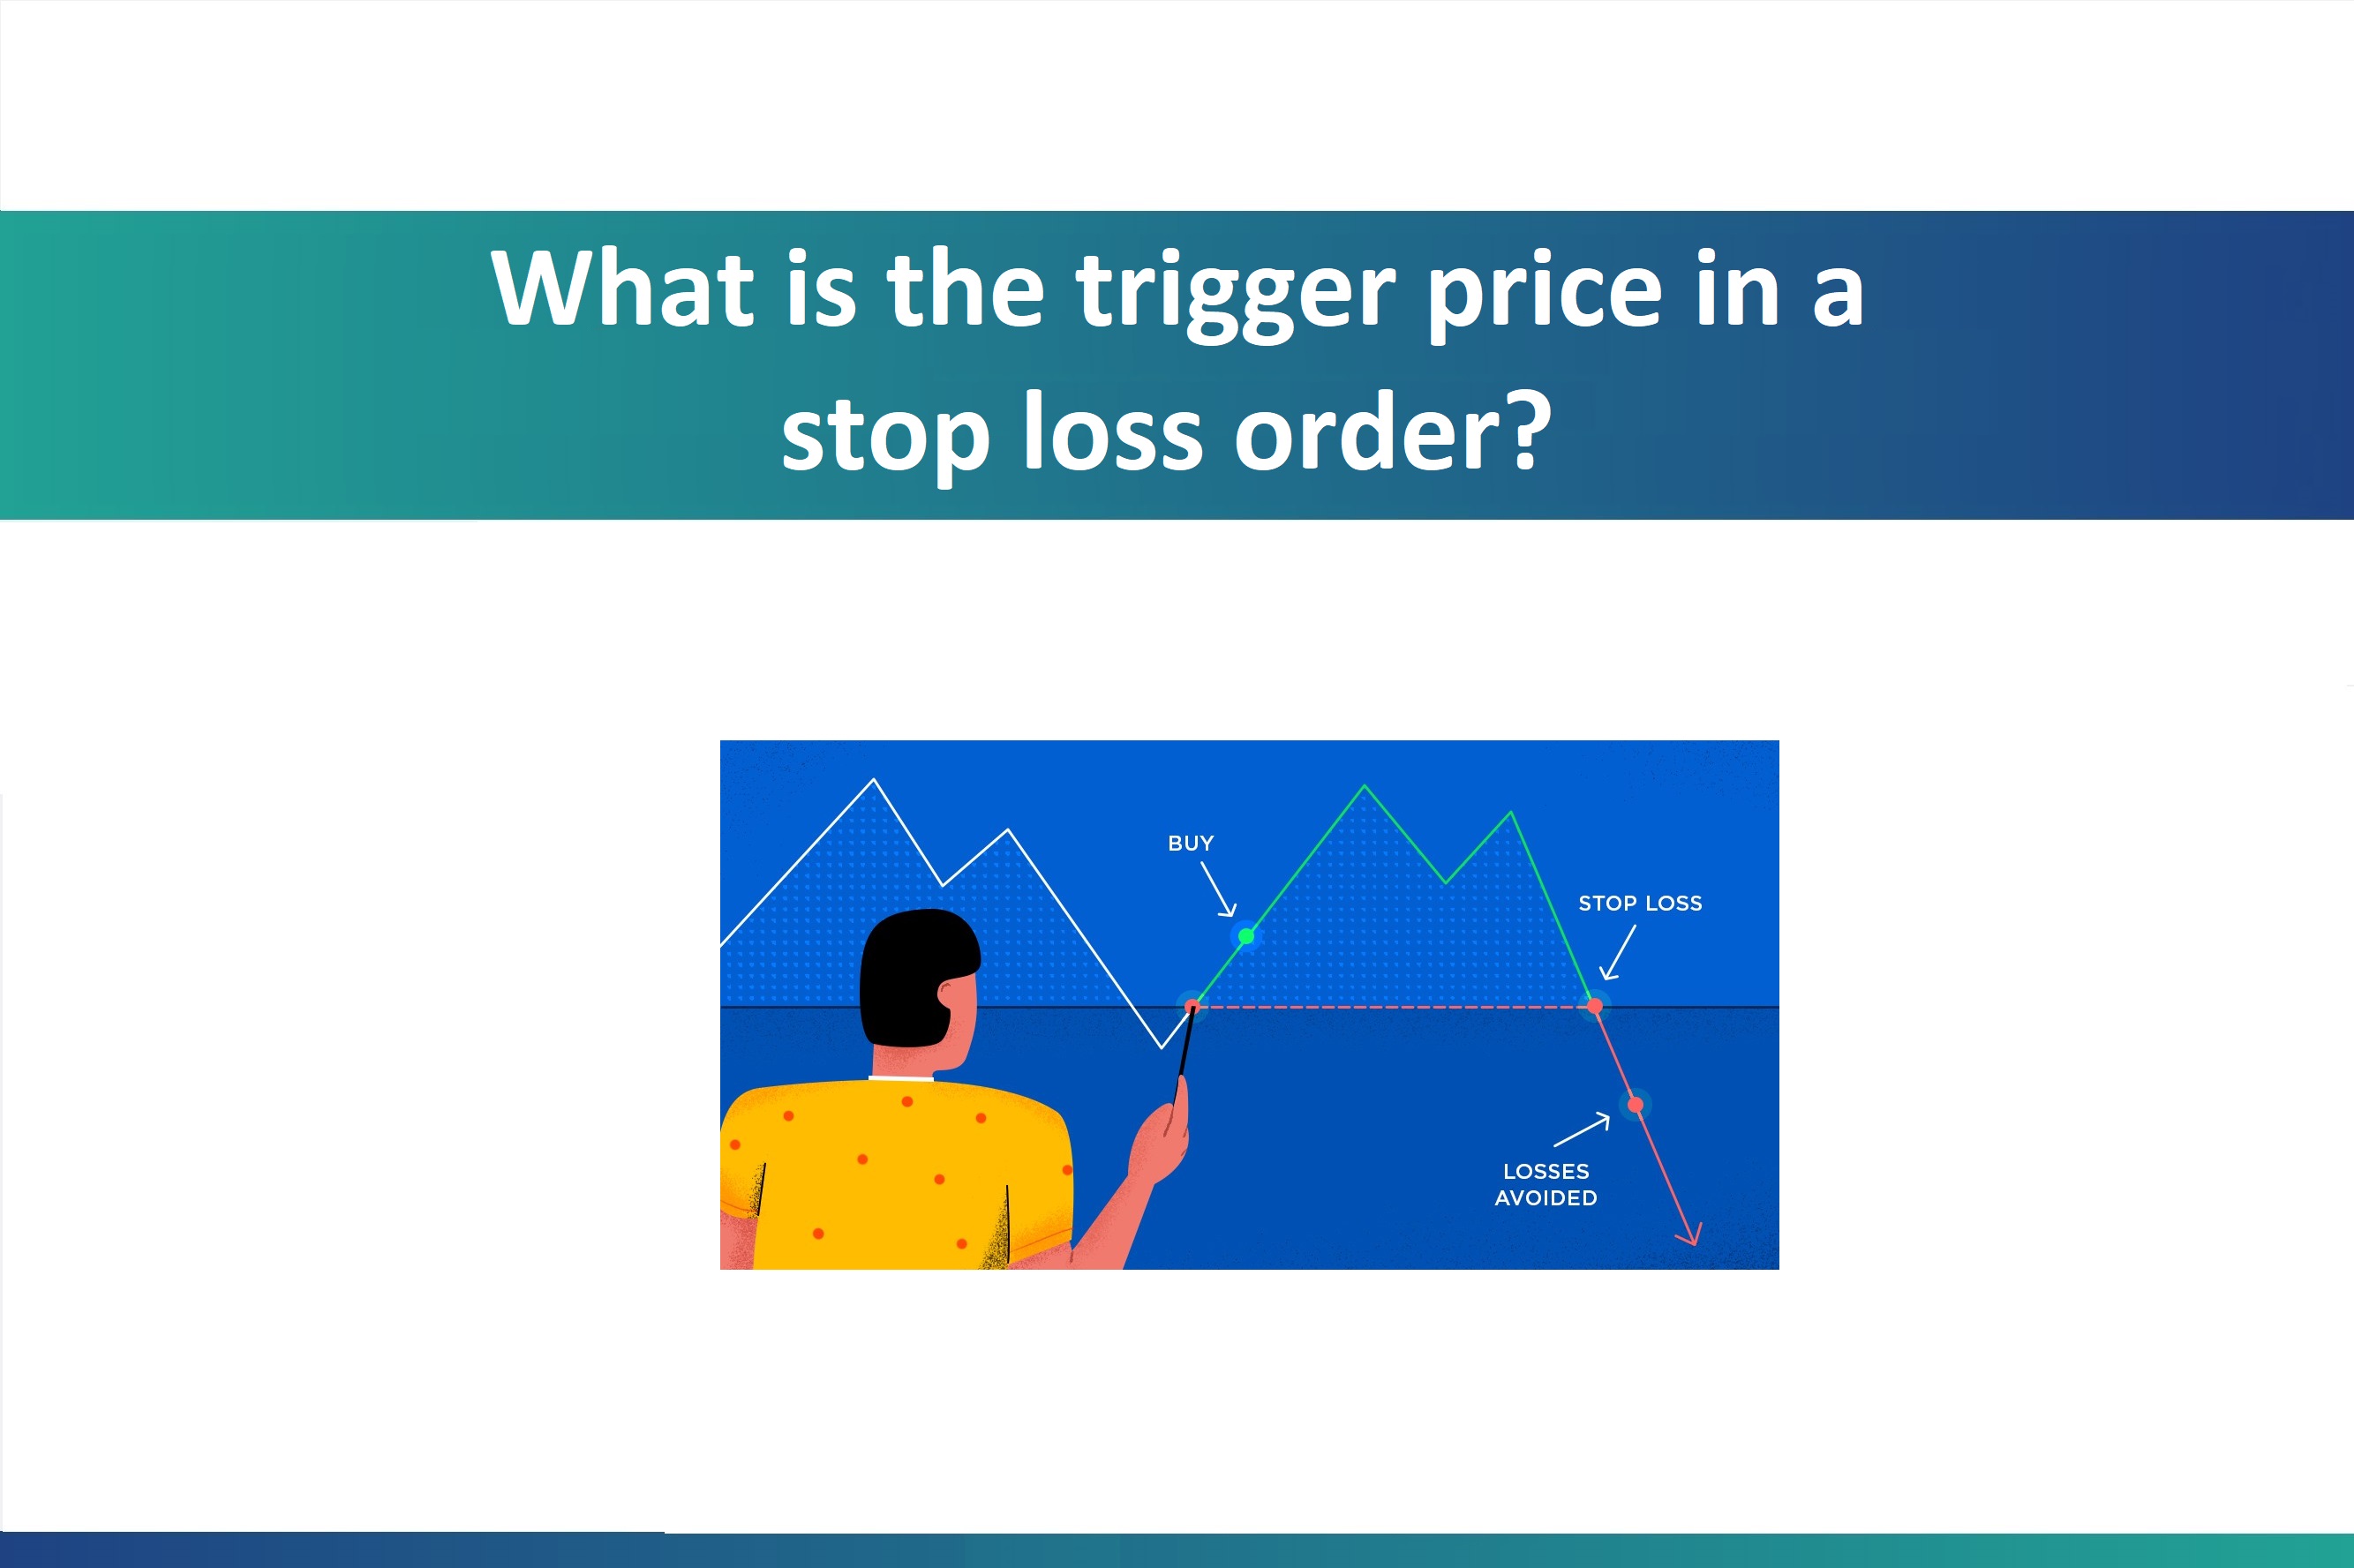 What is the trigger price in a stop loss order?